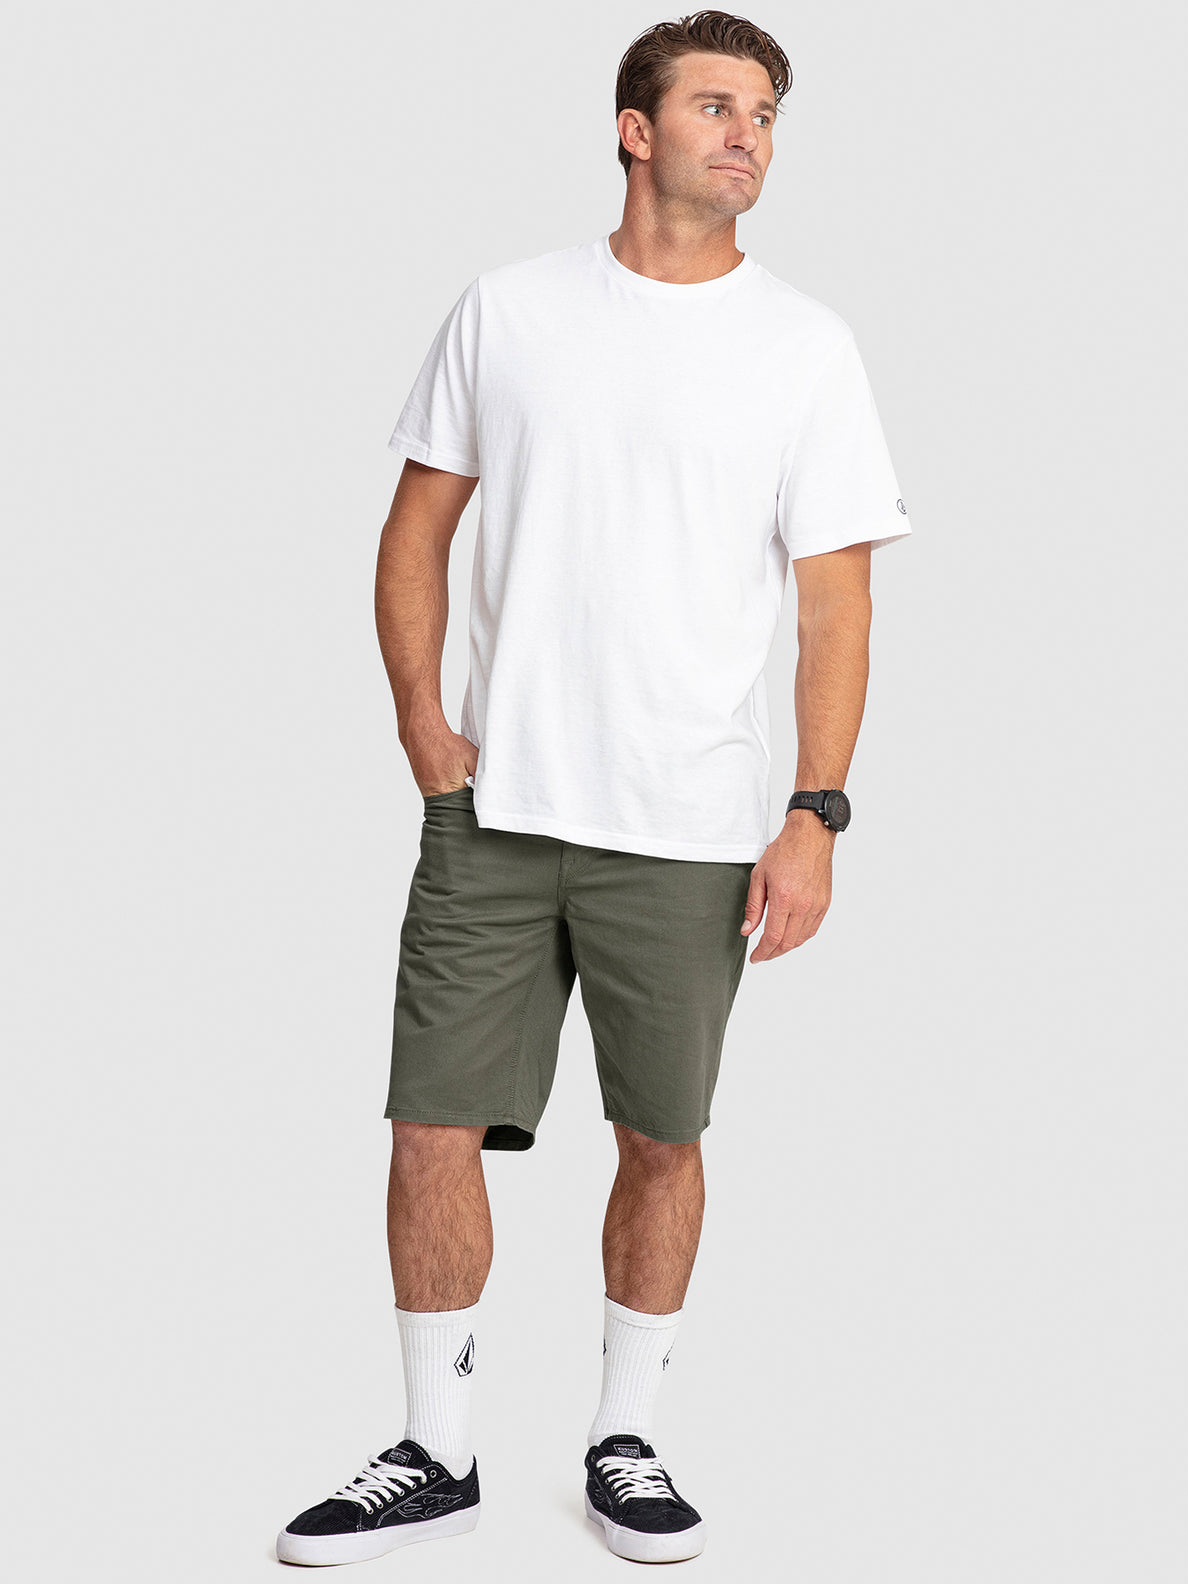 Solver Lite 5 Pocket Shorts - Army Green Combo